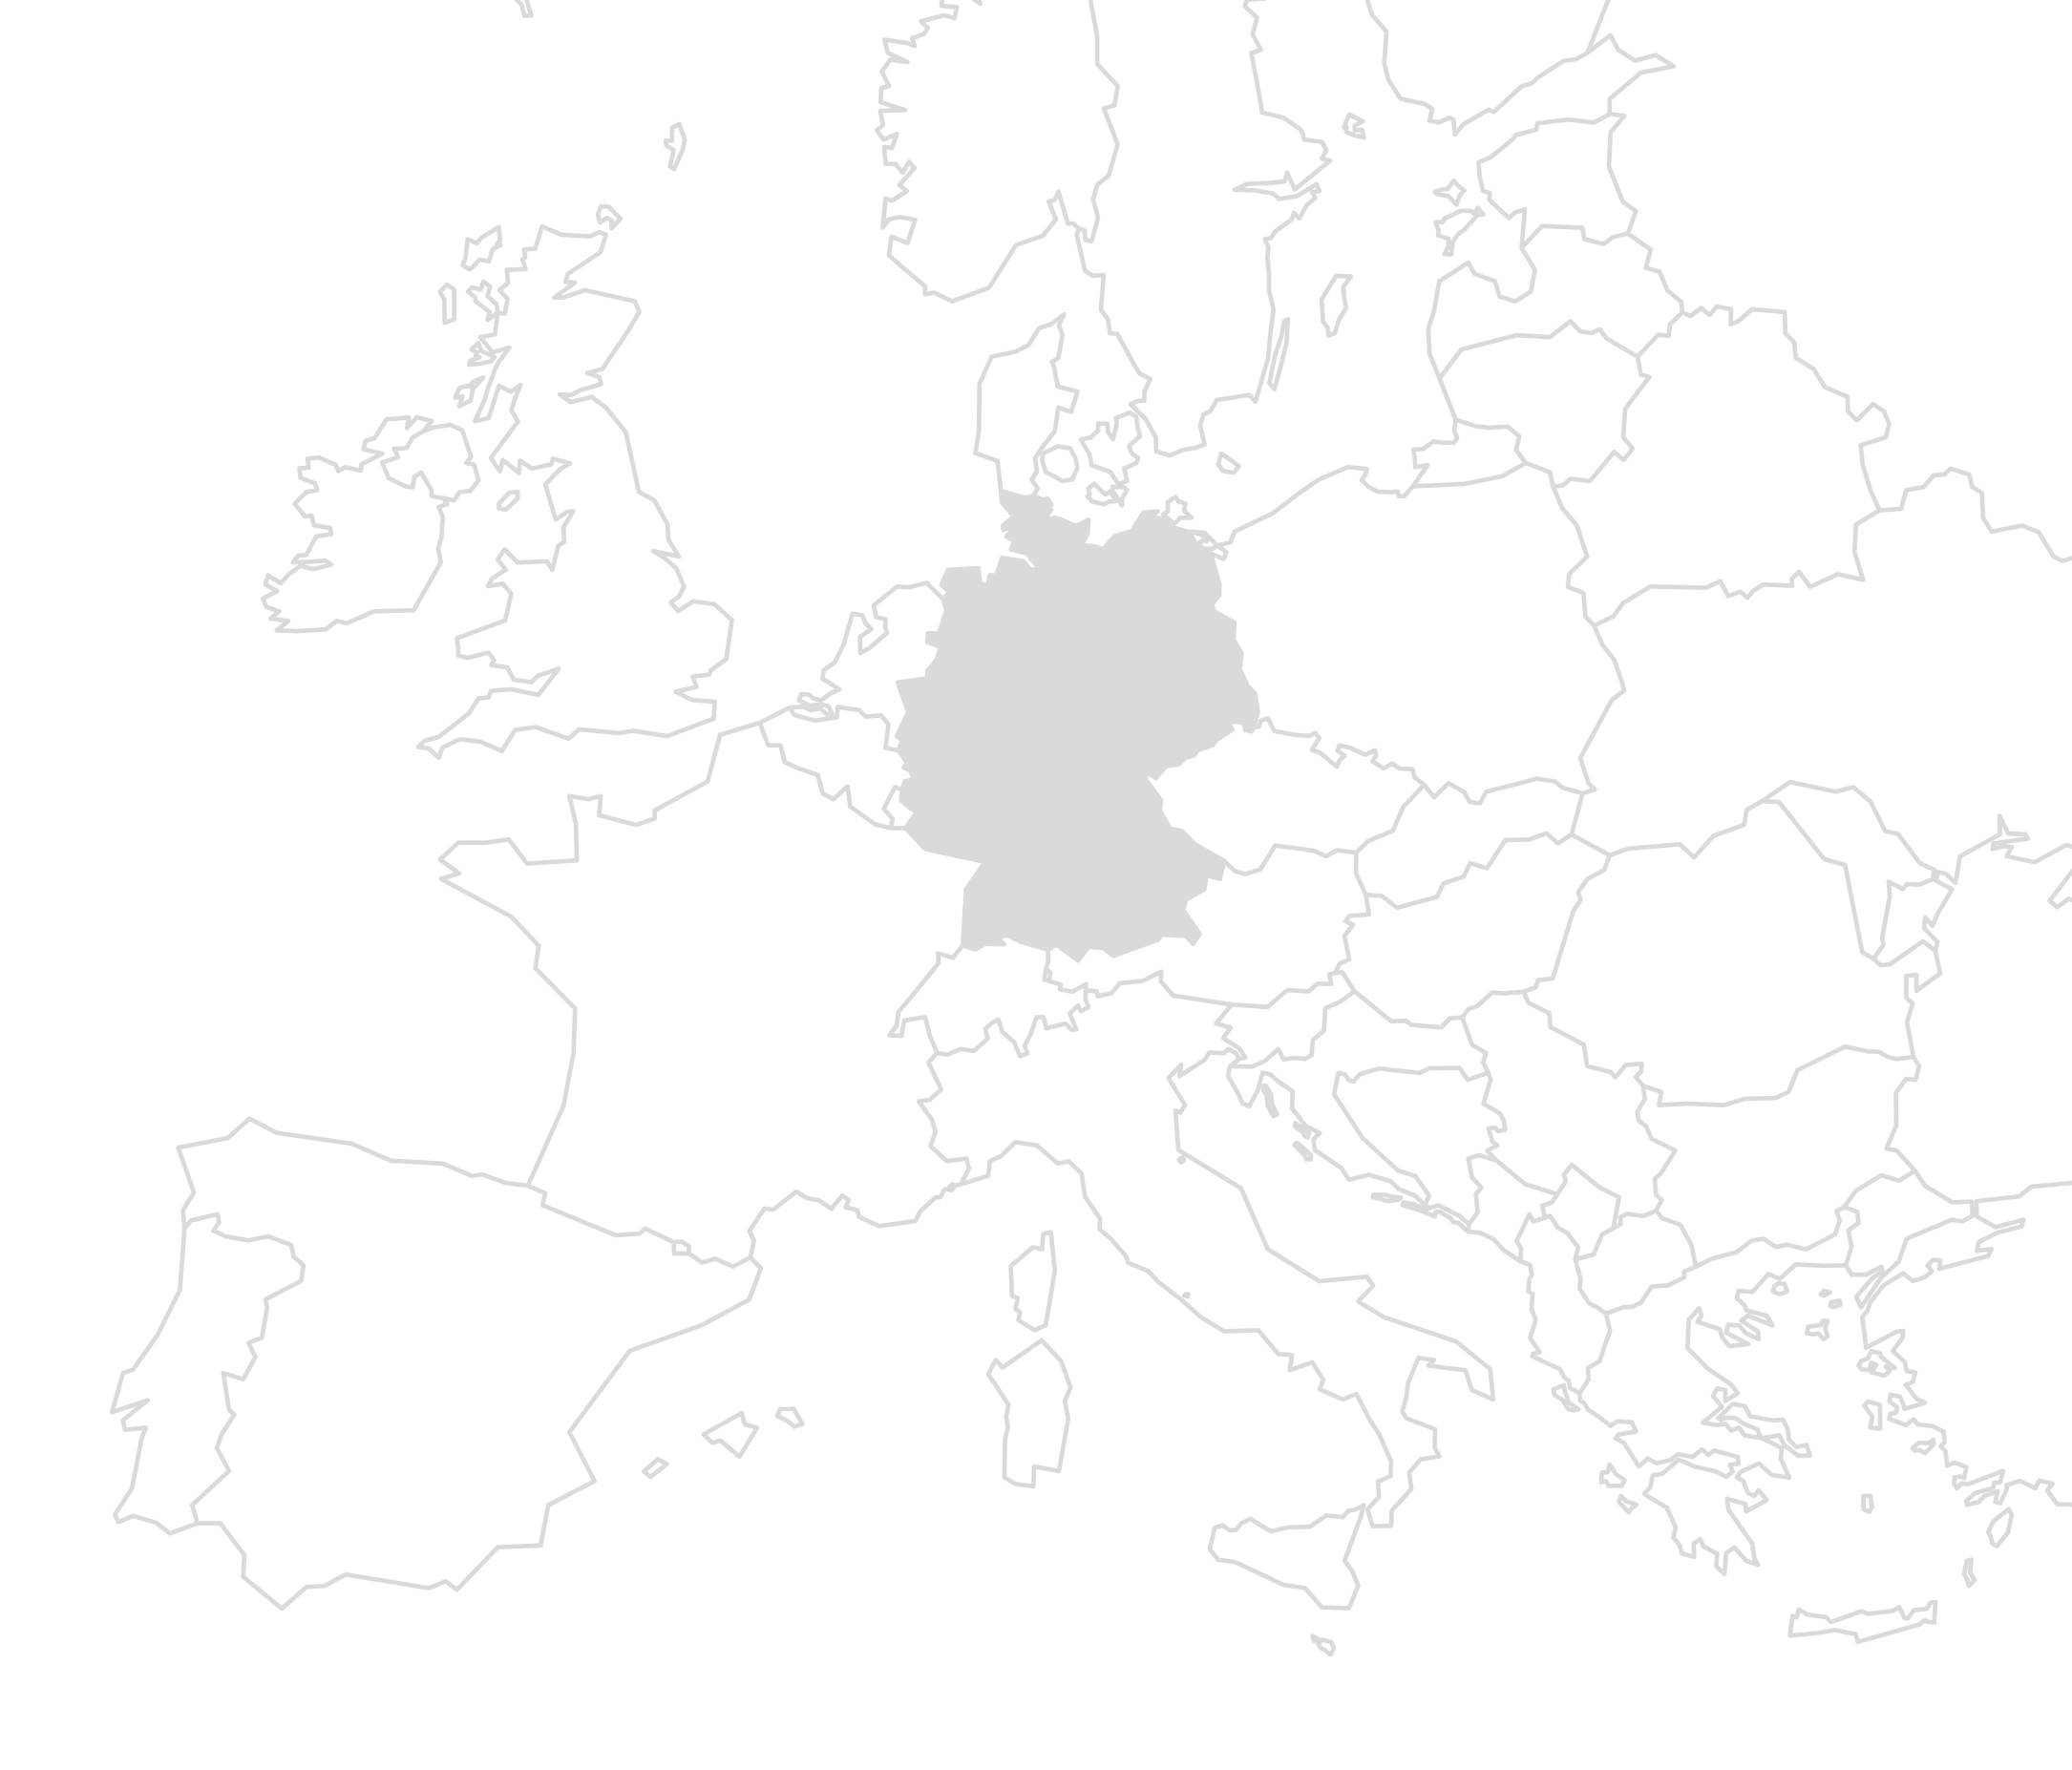 A map of Europe where Germany is filled in gray to visualize the location of the construction project.